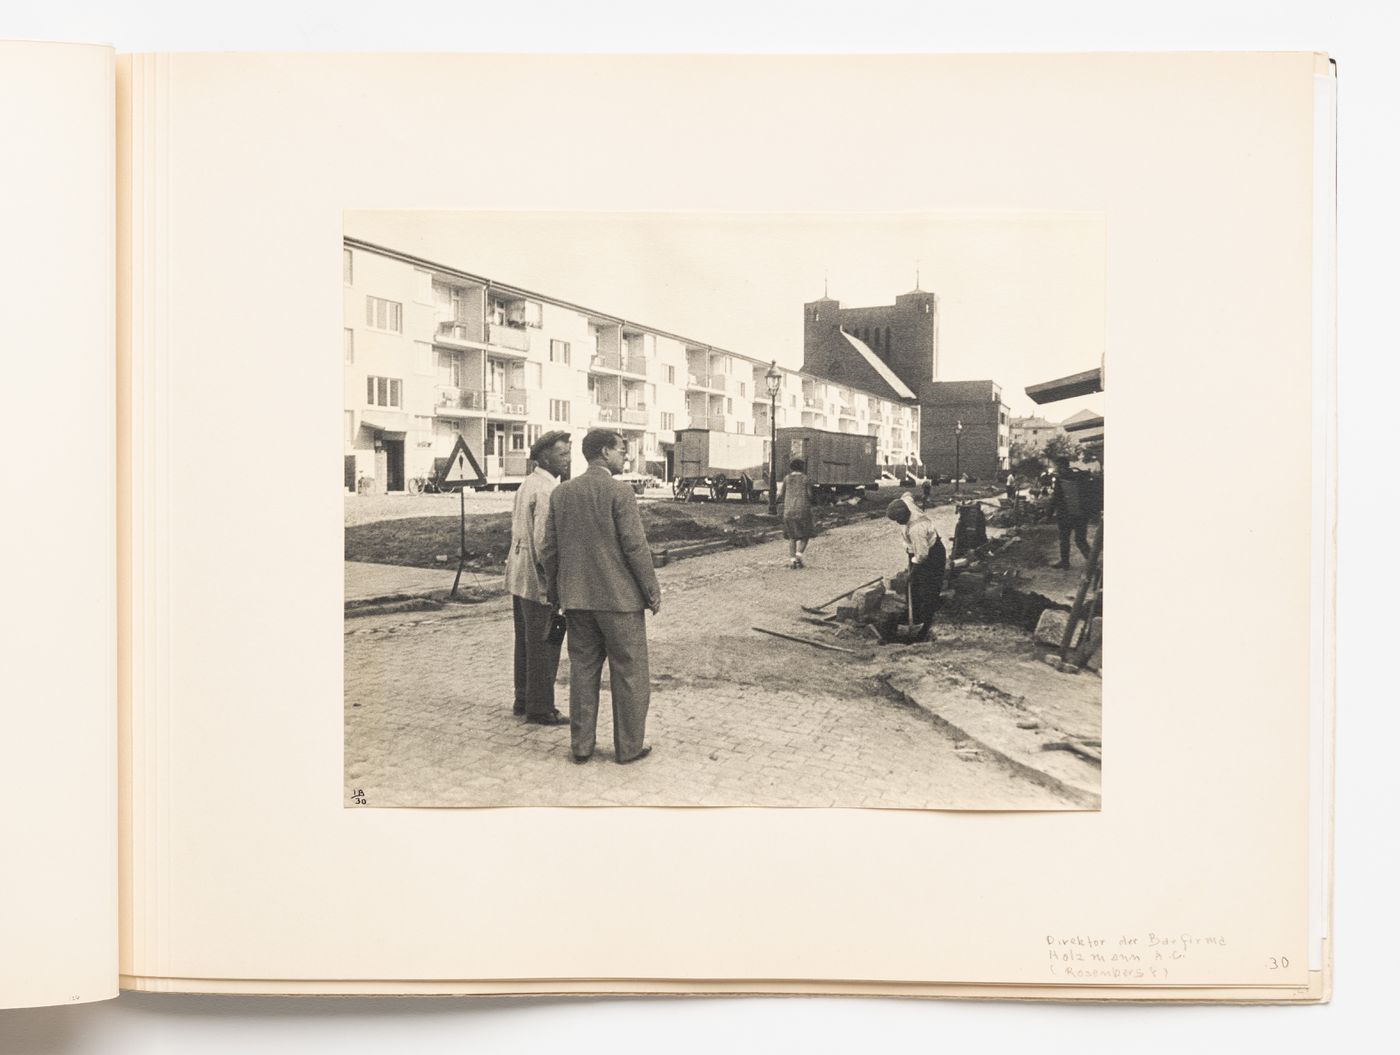 Exterior view of type A housing units with the Director of Holzmann A.G., Mr. Rosenberg [?], and a foreman [?], Hellerhof Housing Estate, Frankfurt am Main, Germany